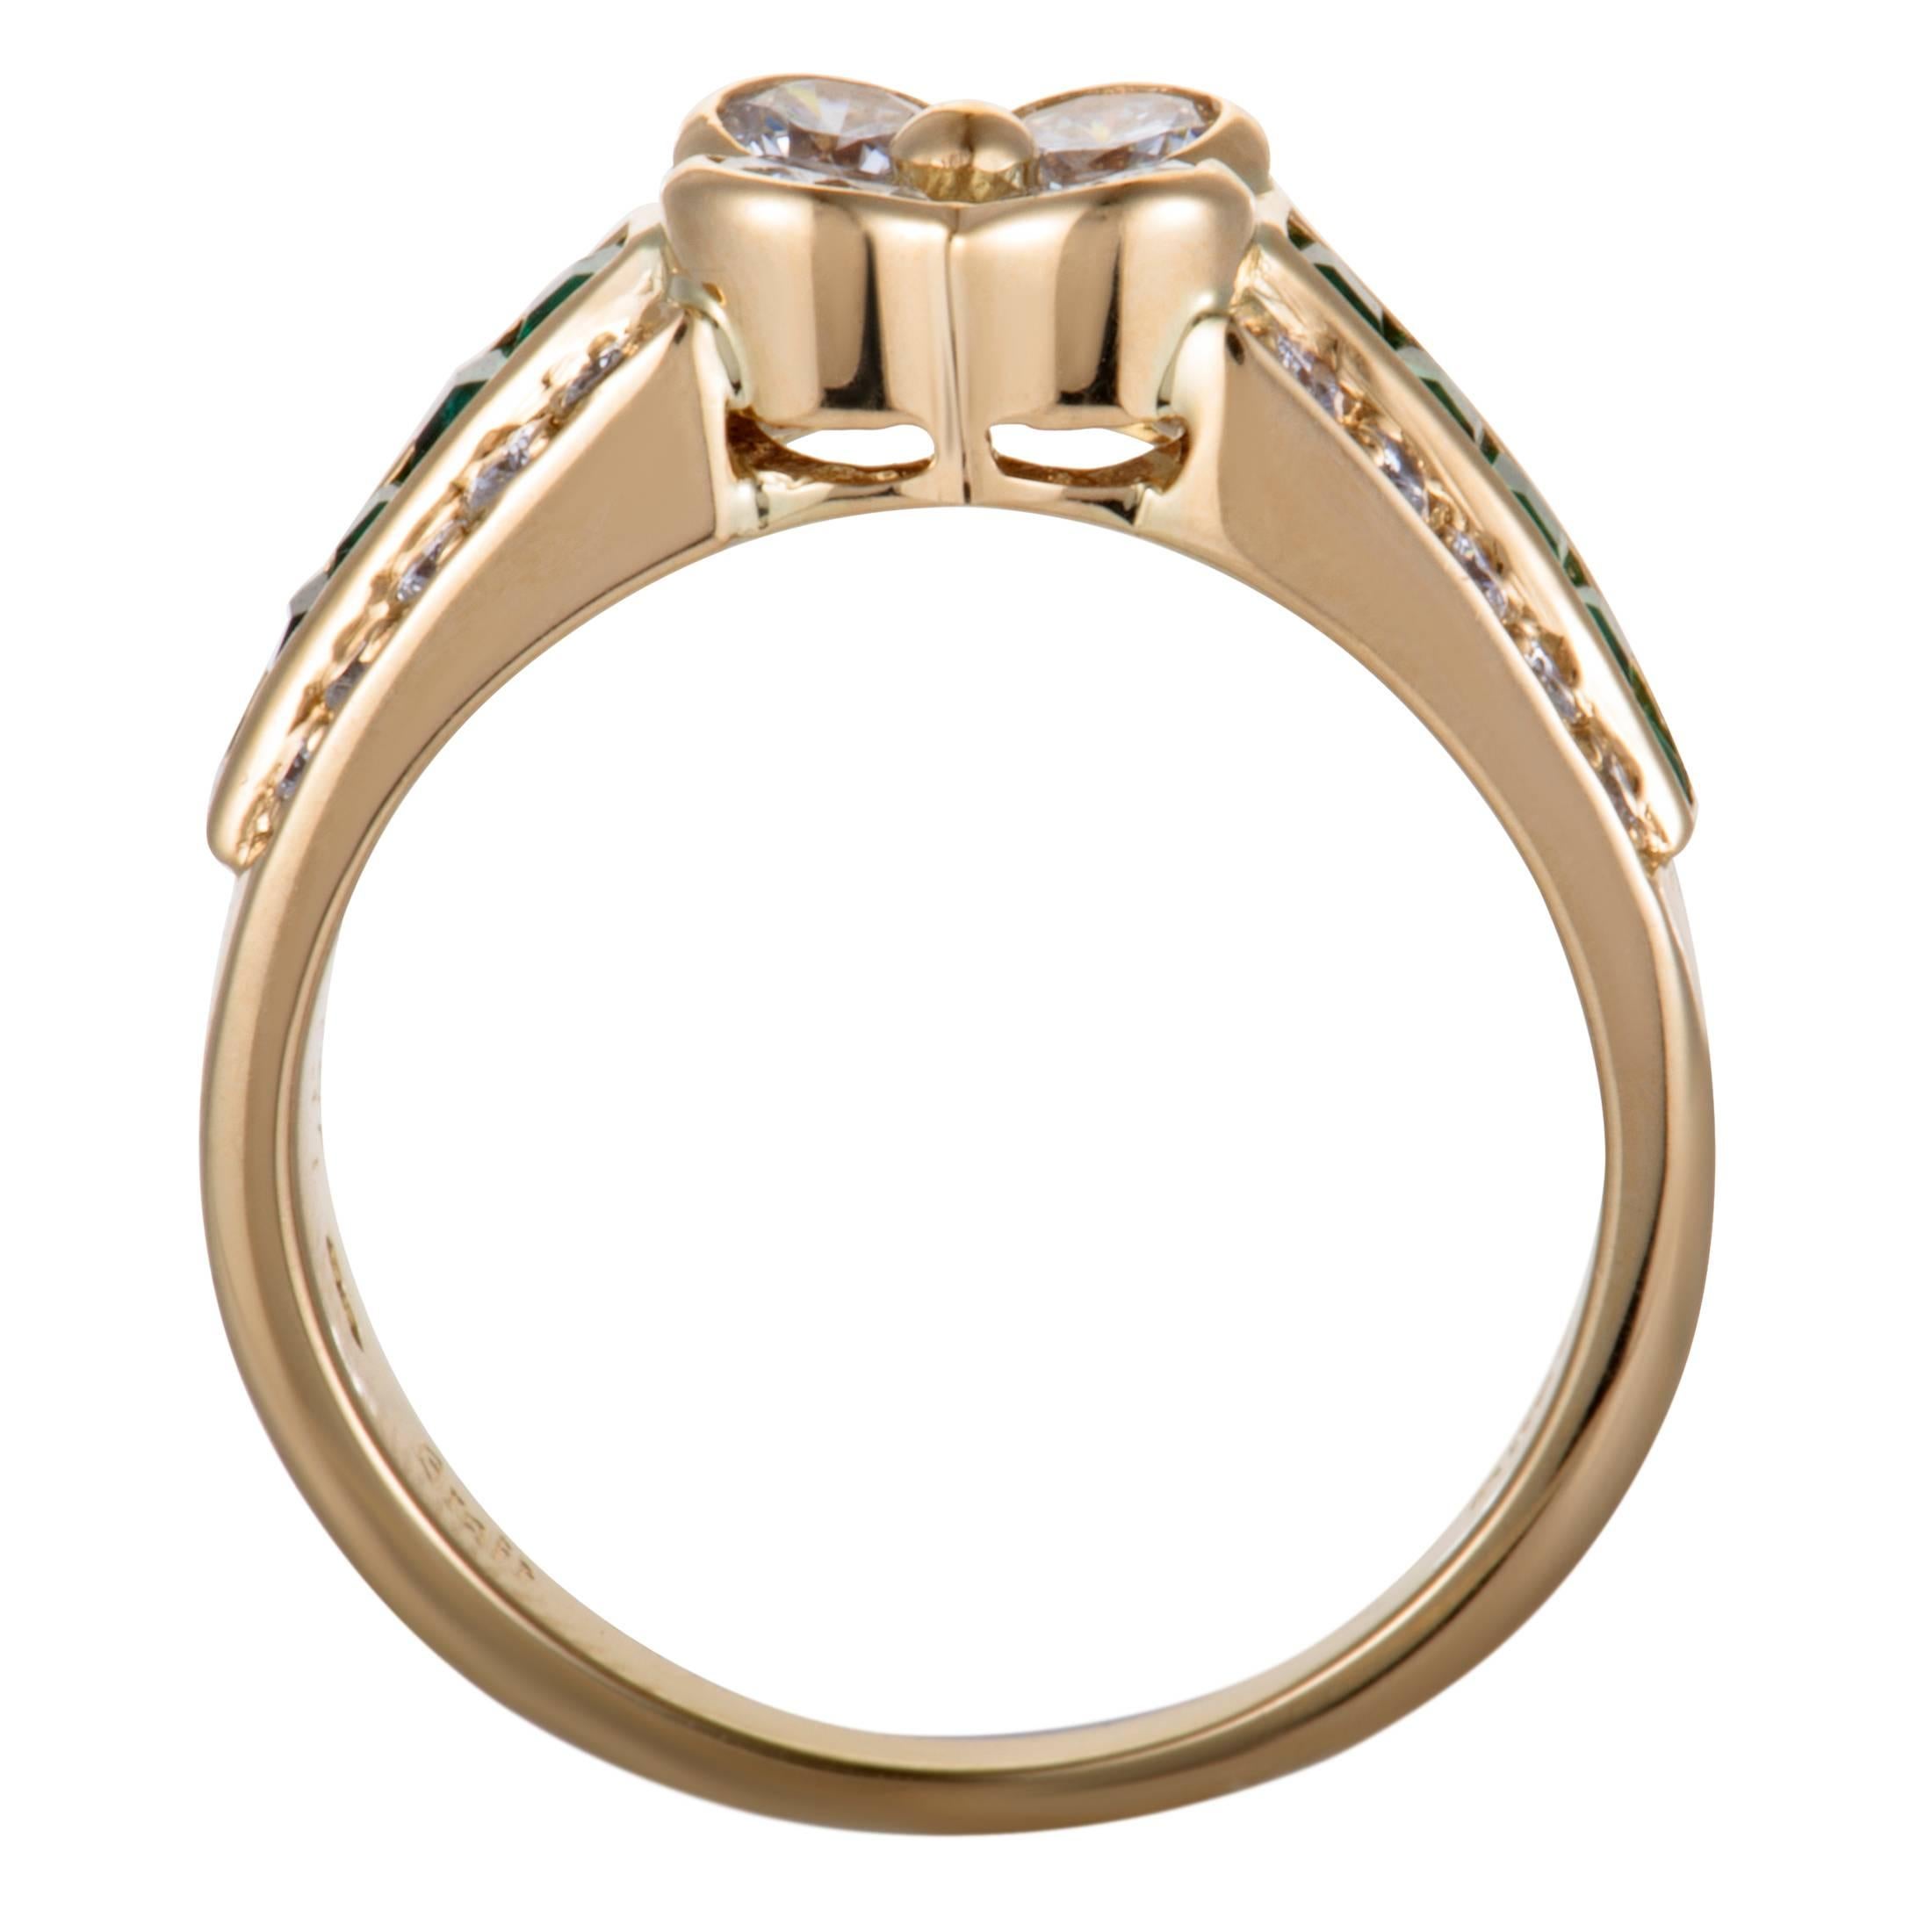 This elegant 18K yellow gold ring by Graff features an exquisitely captivating style. The remarkable ring is adorned in 1.11ct of dazzling diamonds and 0.35ct of mesmerizing green emeralds that accentuate the extravagance of the beautiful